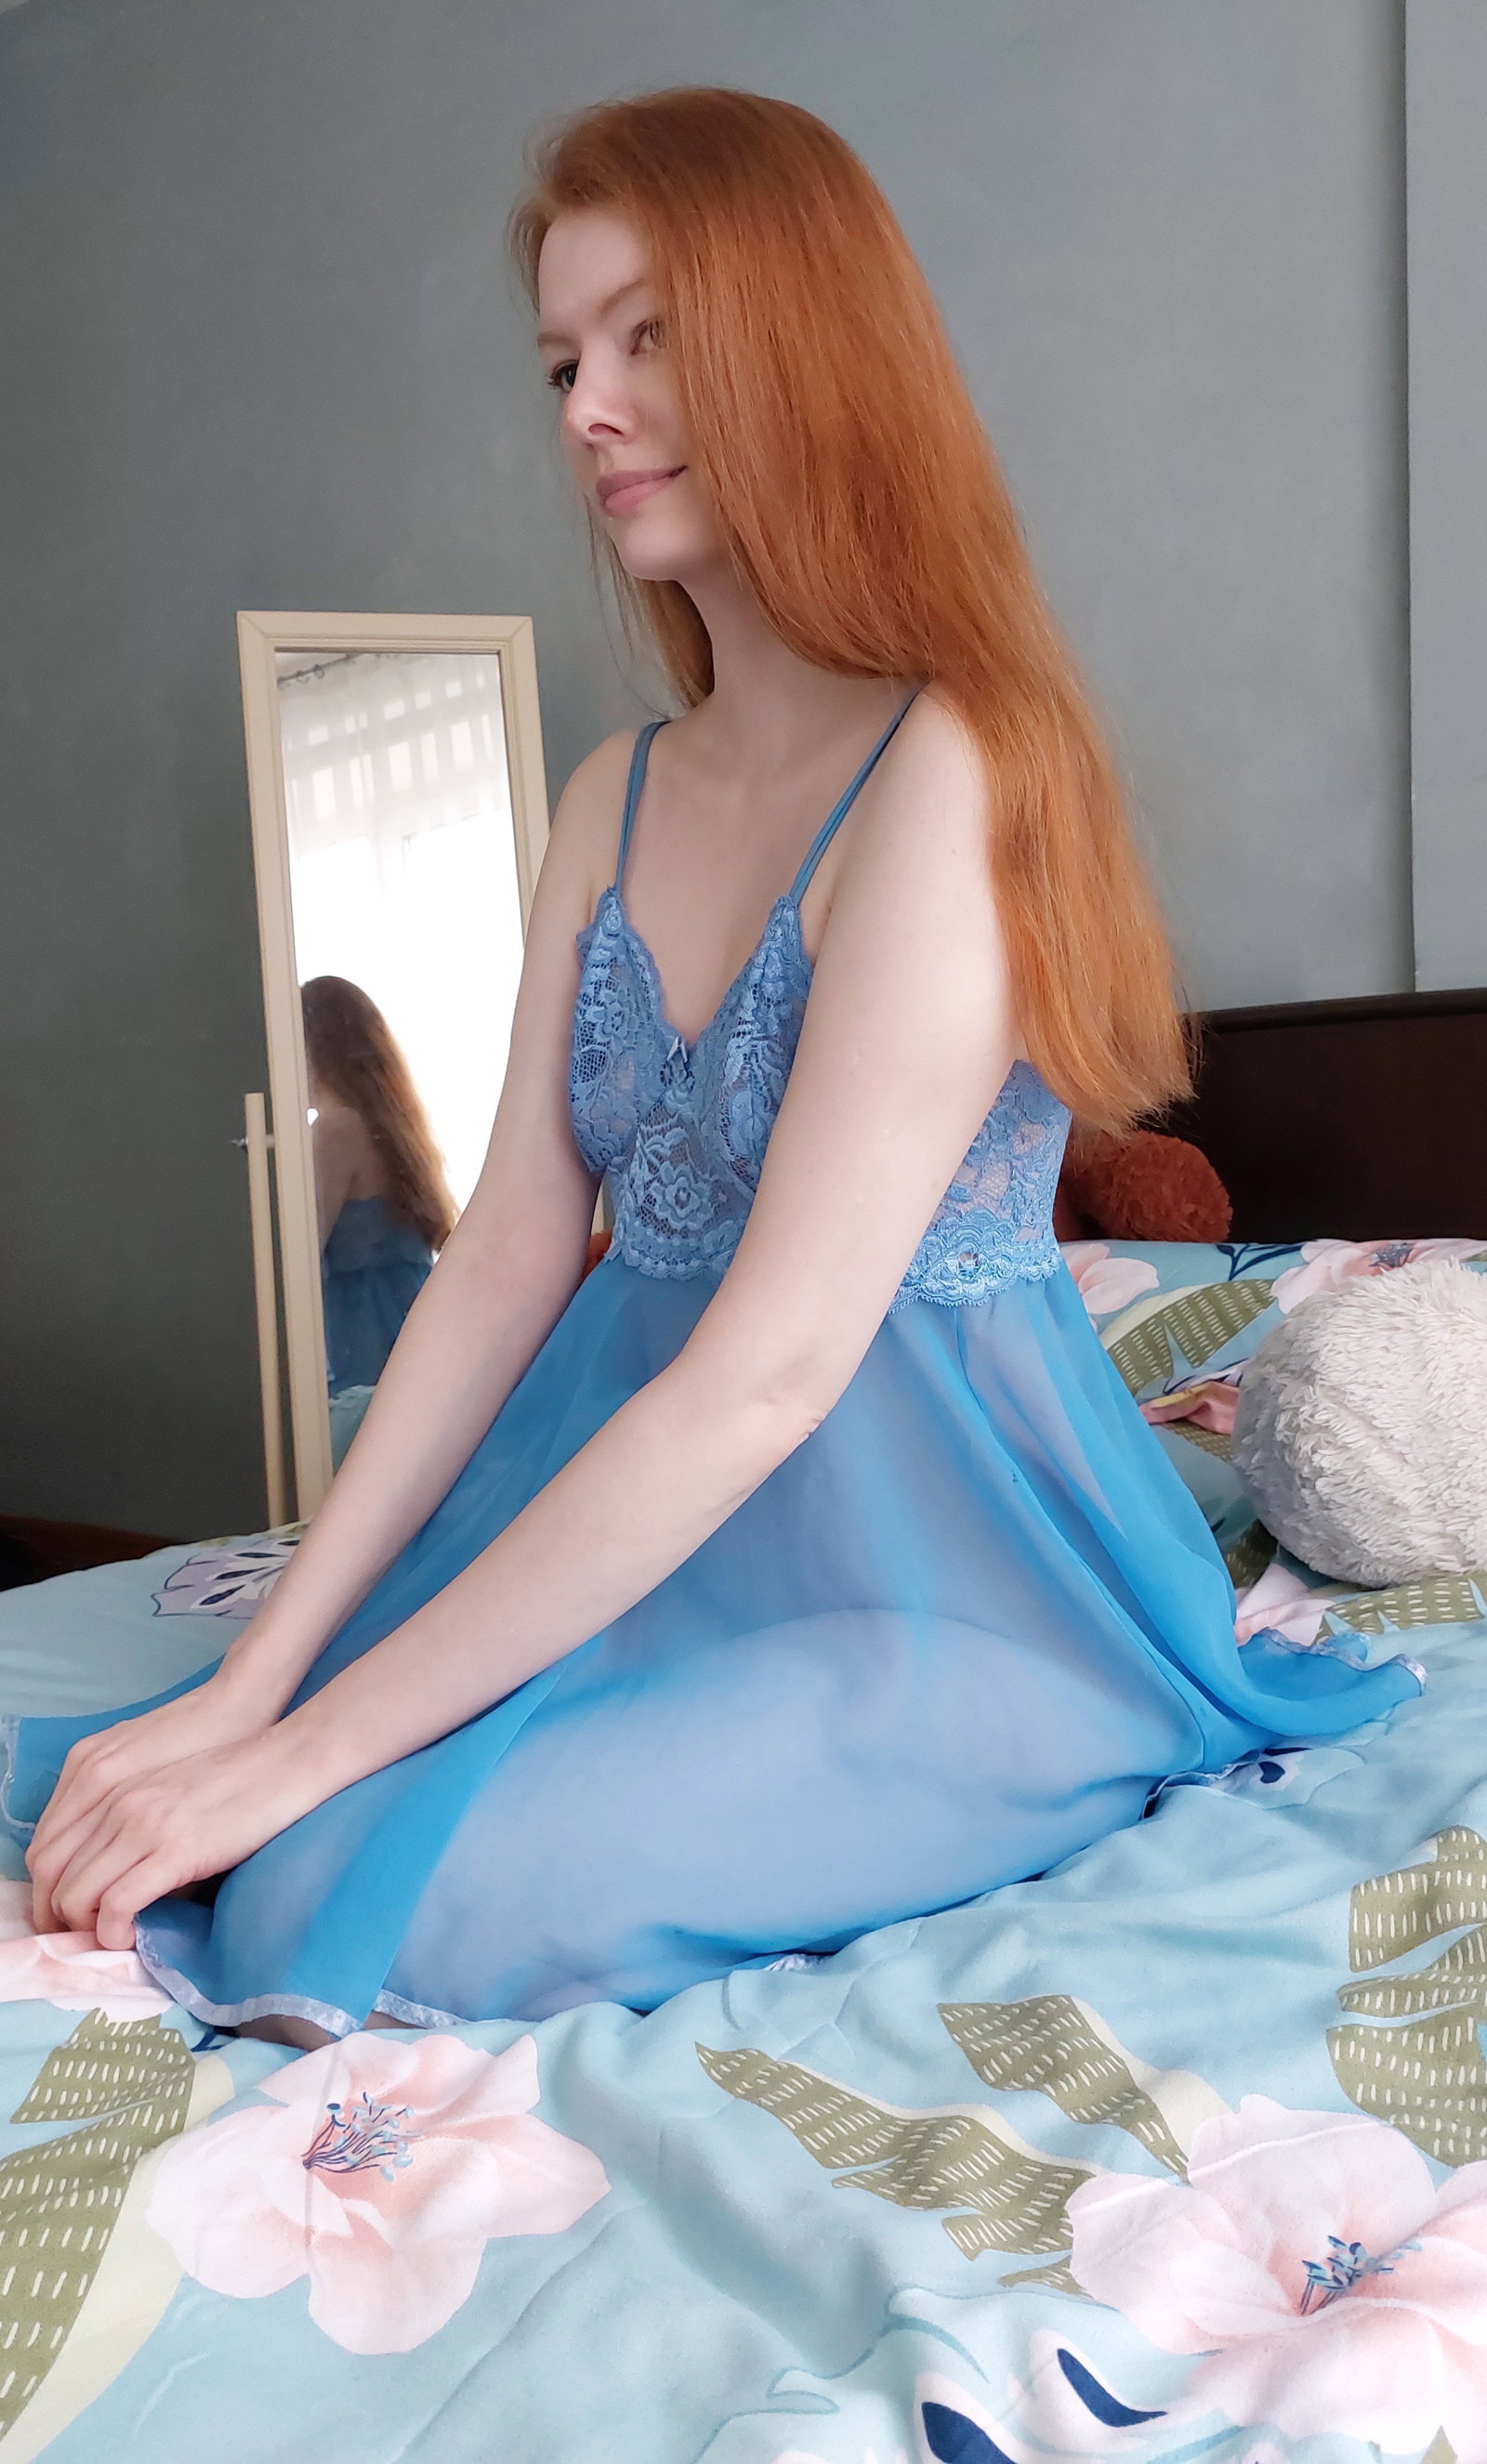 Photo by Lady inari with the username @Ladyinari, who is a star user,  May 9, 2024 at 9:23 PM. The post is about the topic Nude Selfies and the text says 'Me and you?😉 You can't resist a red-haired beauty! So you're already running to  my stream (
https://frontfanz.com/profile/lady_inari?refid=33376845&campid=default
)  #redhead #ginger #petite #hotgirl #sexy #sweetgirl #joi #cei'